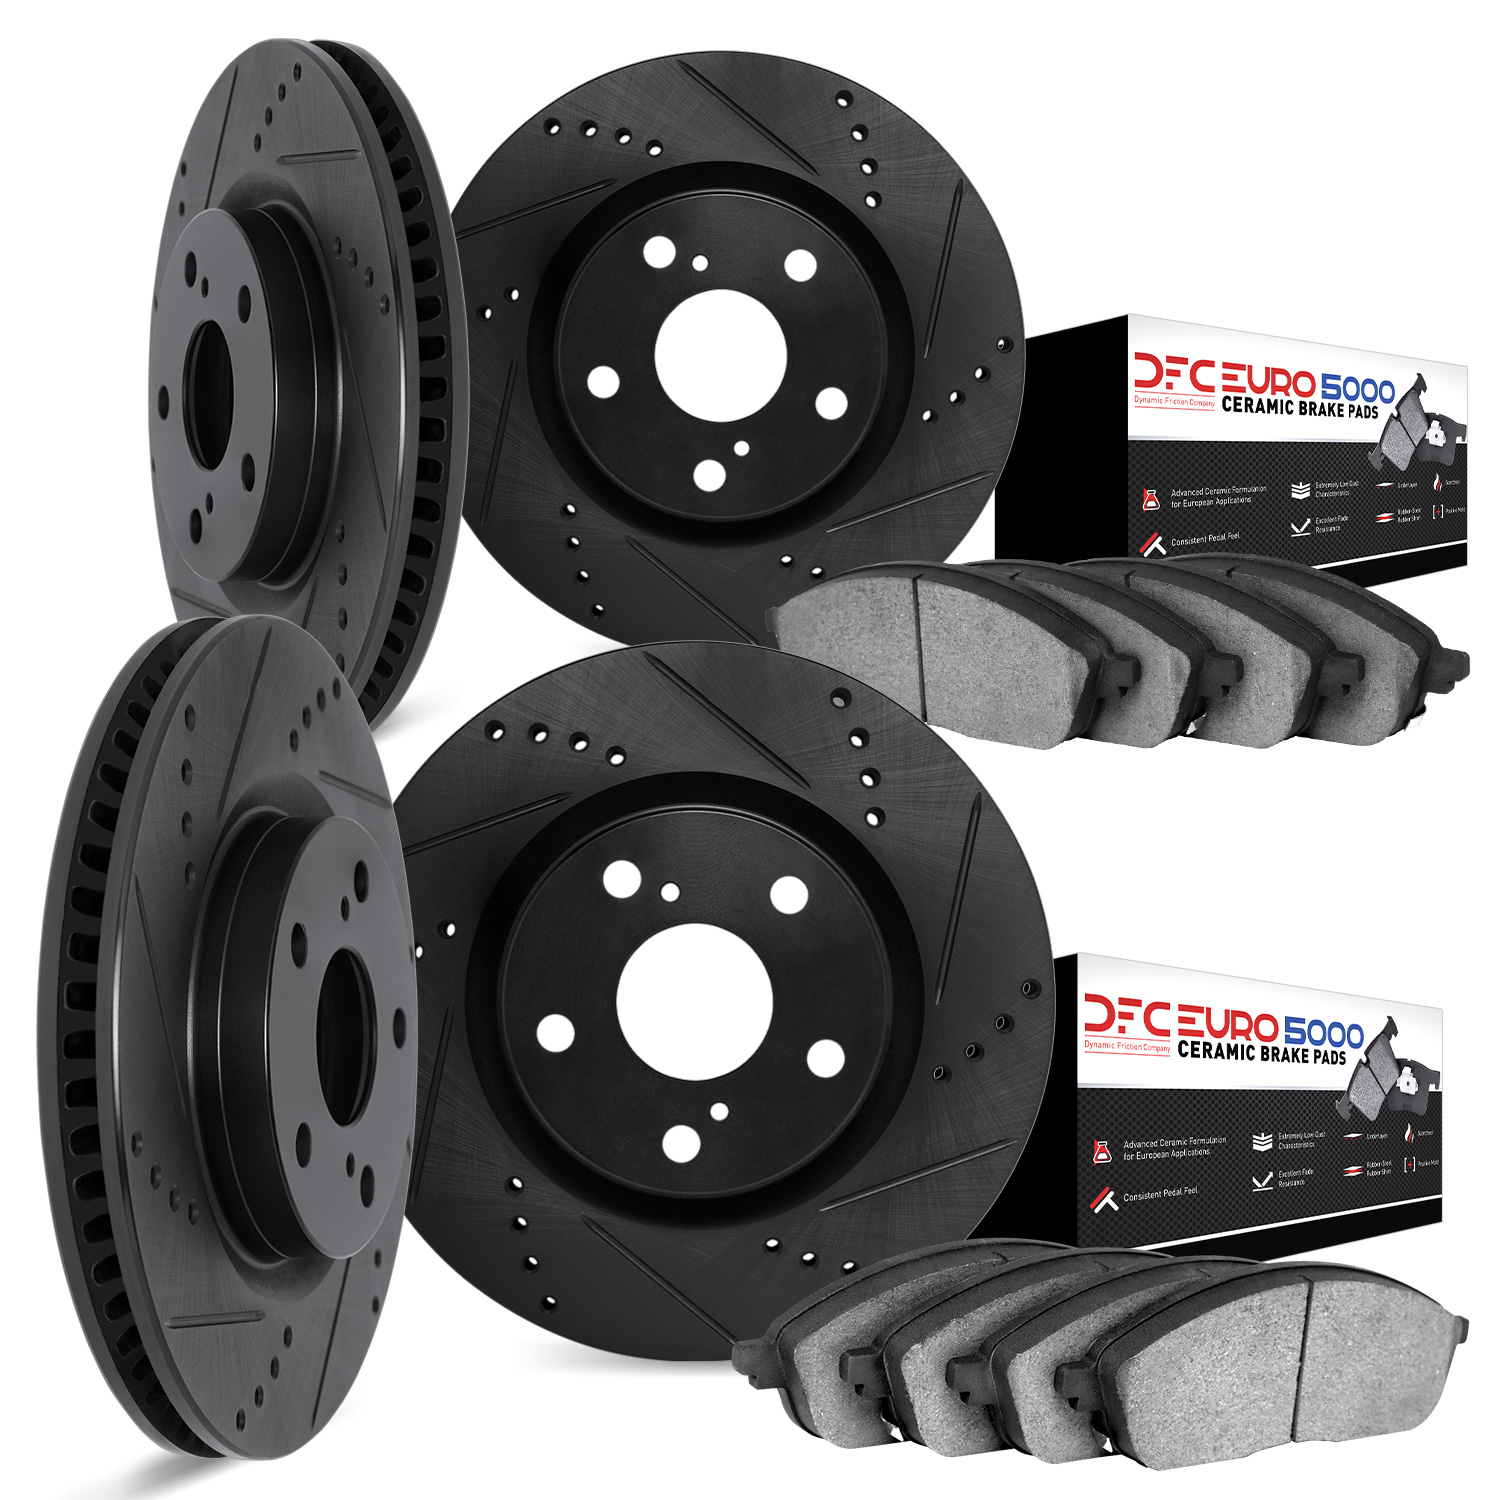 8604-31029 Drilled/Slotted Brake Rotors w/5000 Euro Ceramic Brake Pads Kit [Black], 2011-2016 BMW, Position: Front and Rear